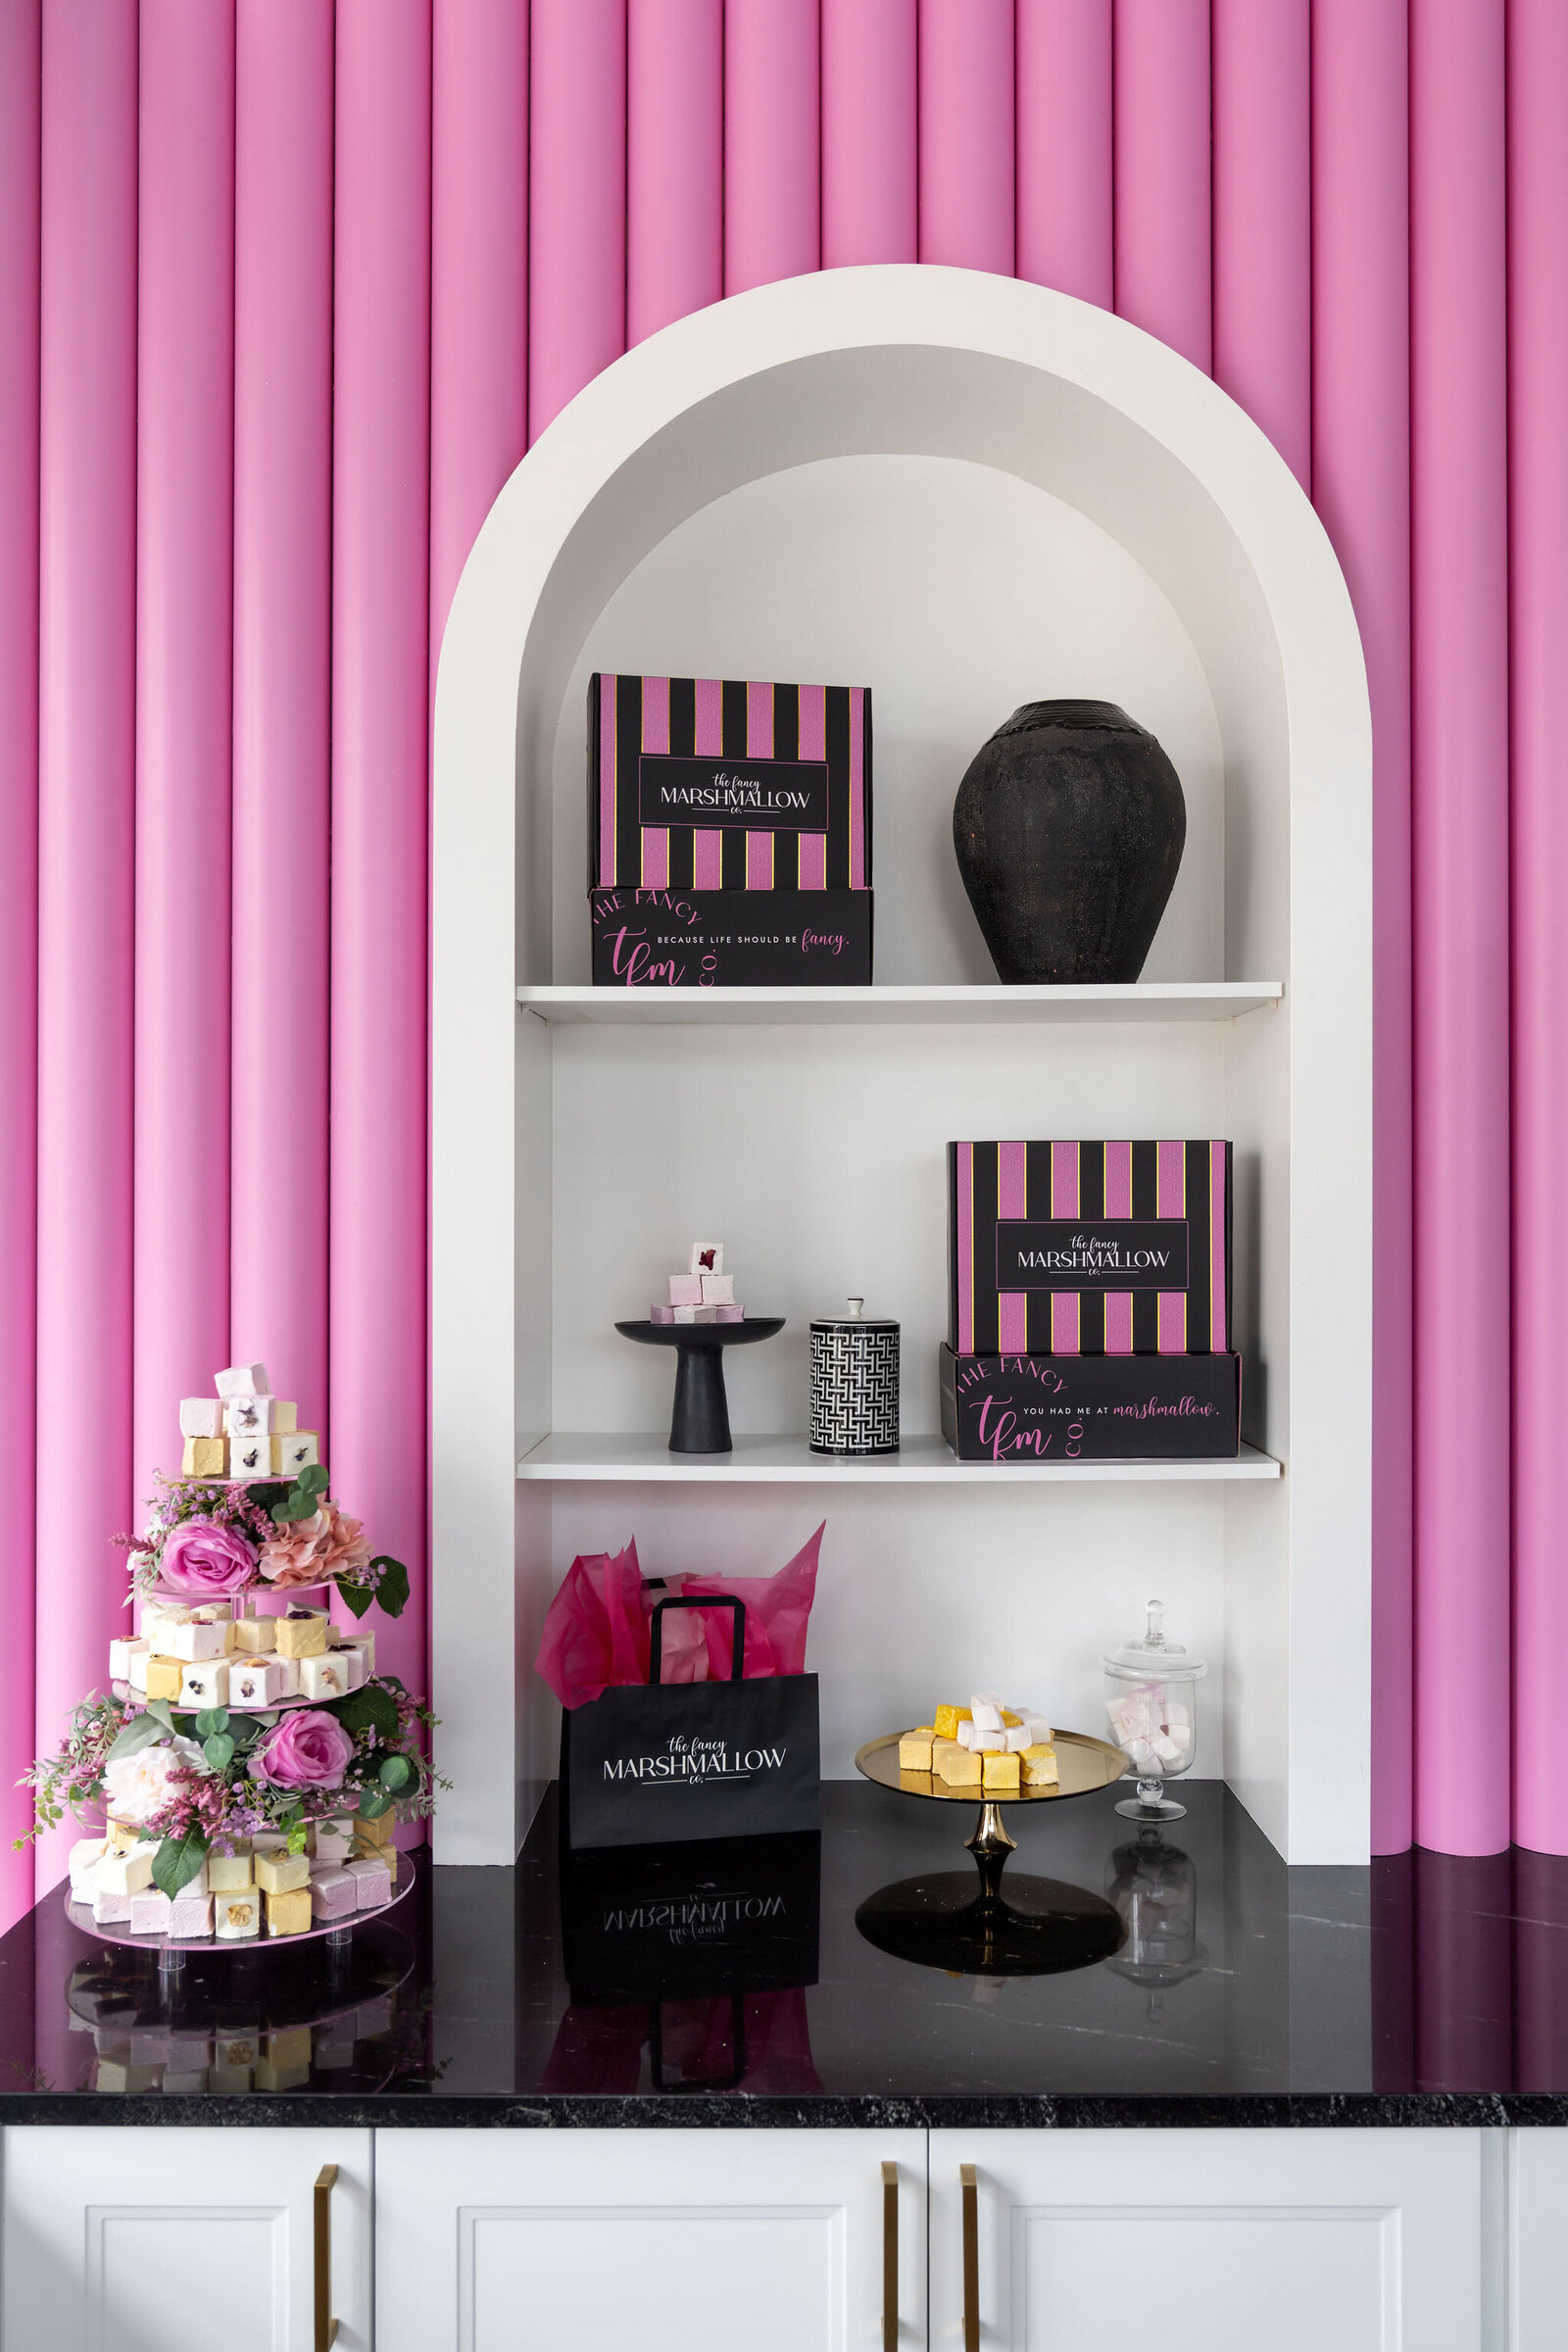 Nuela_Designs_White_Arched_Retail_Display_Pink_Wall